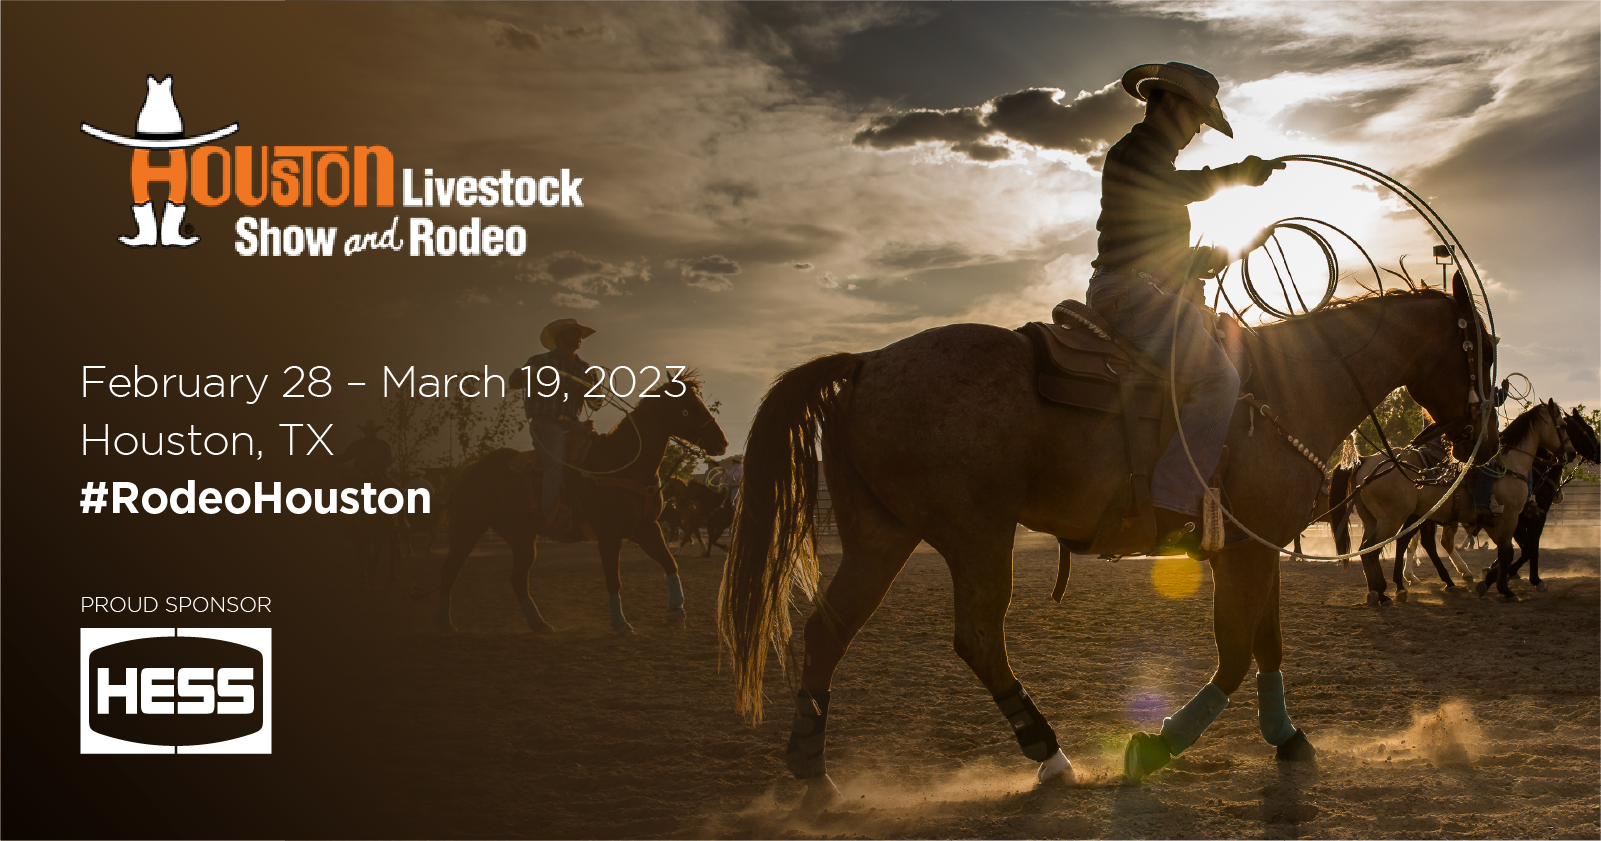 Hess Sponsors the Houston Livestock Show and Rodeo